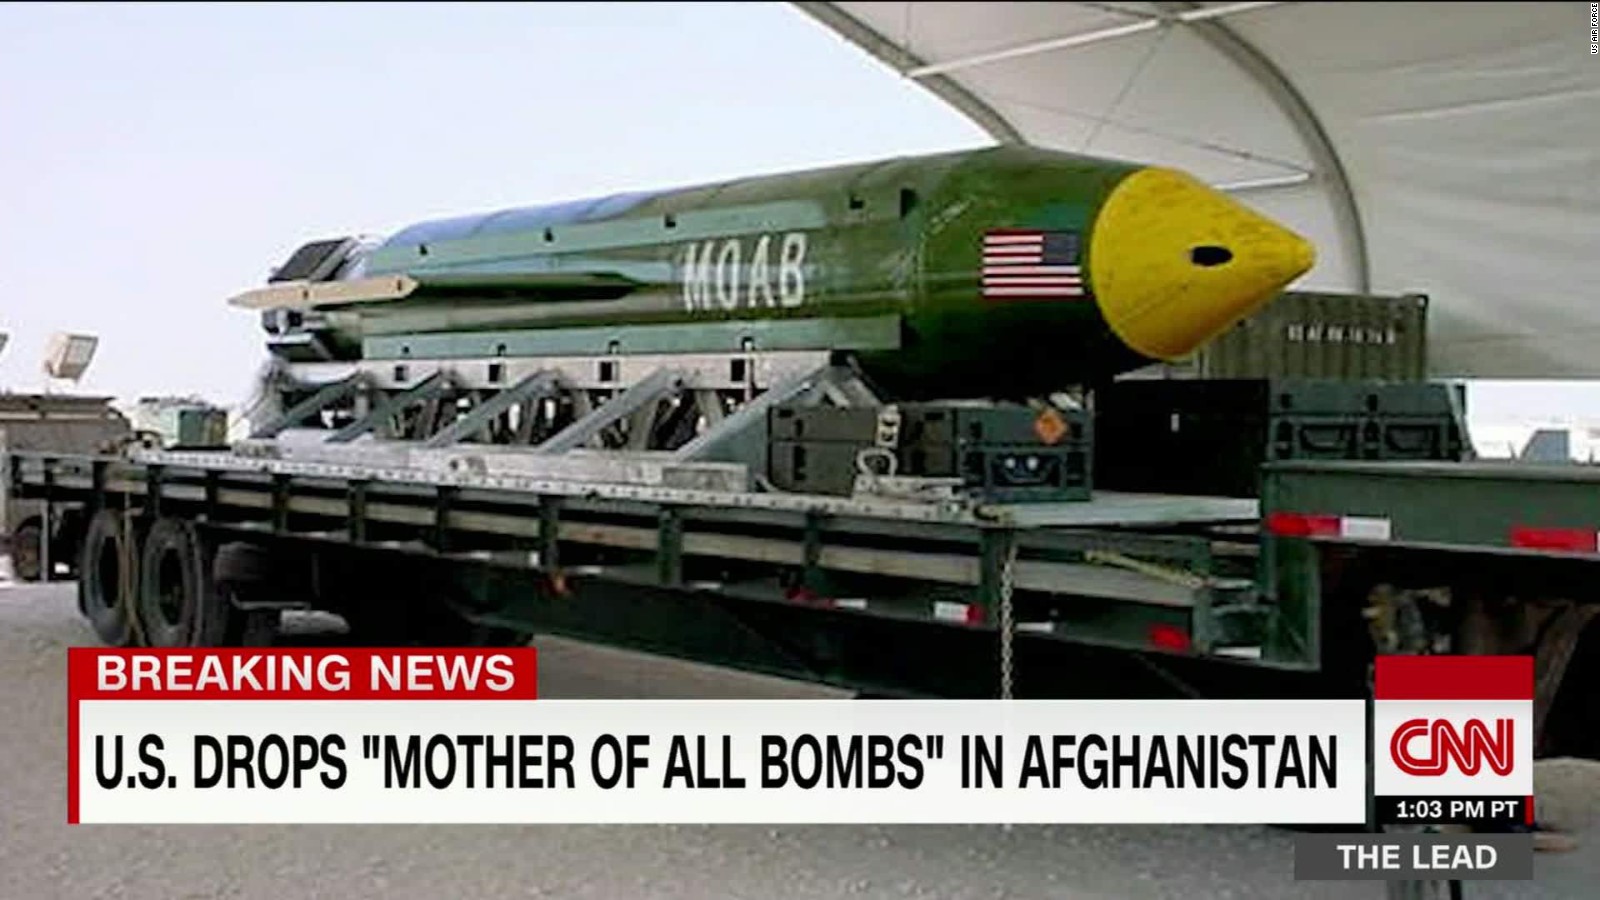 A screenshot of CNN's coverage of the 'Mother of All Bombs' shortly after it was dropped on Afghanistan.